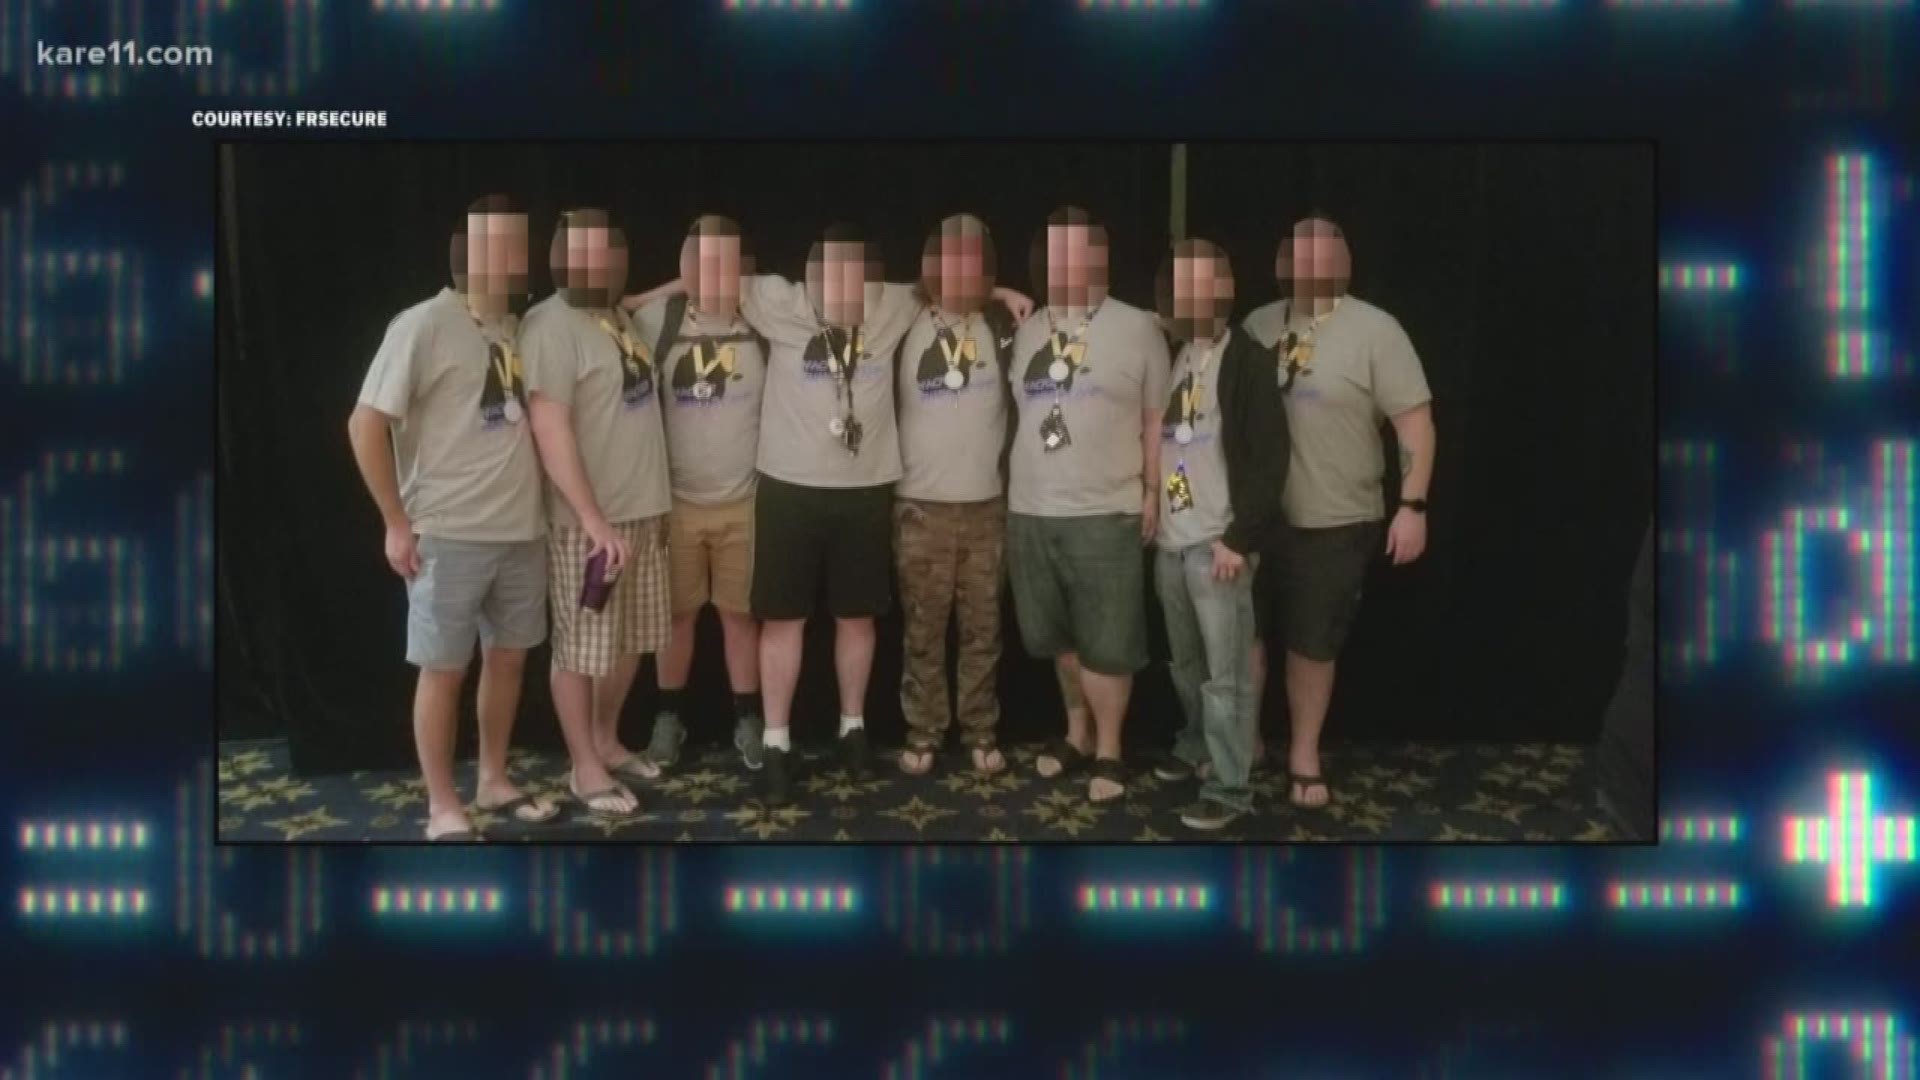 You'd never think it, but a team of Minnesota hackers is among the best in the business.